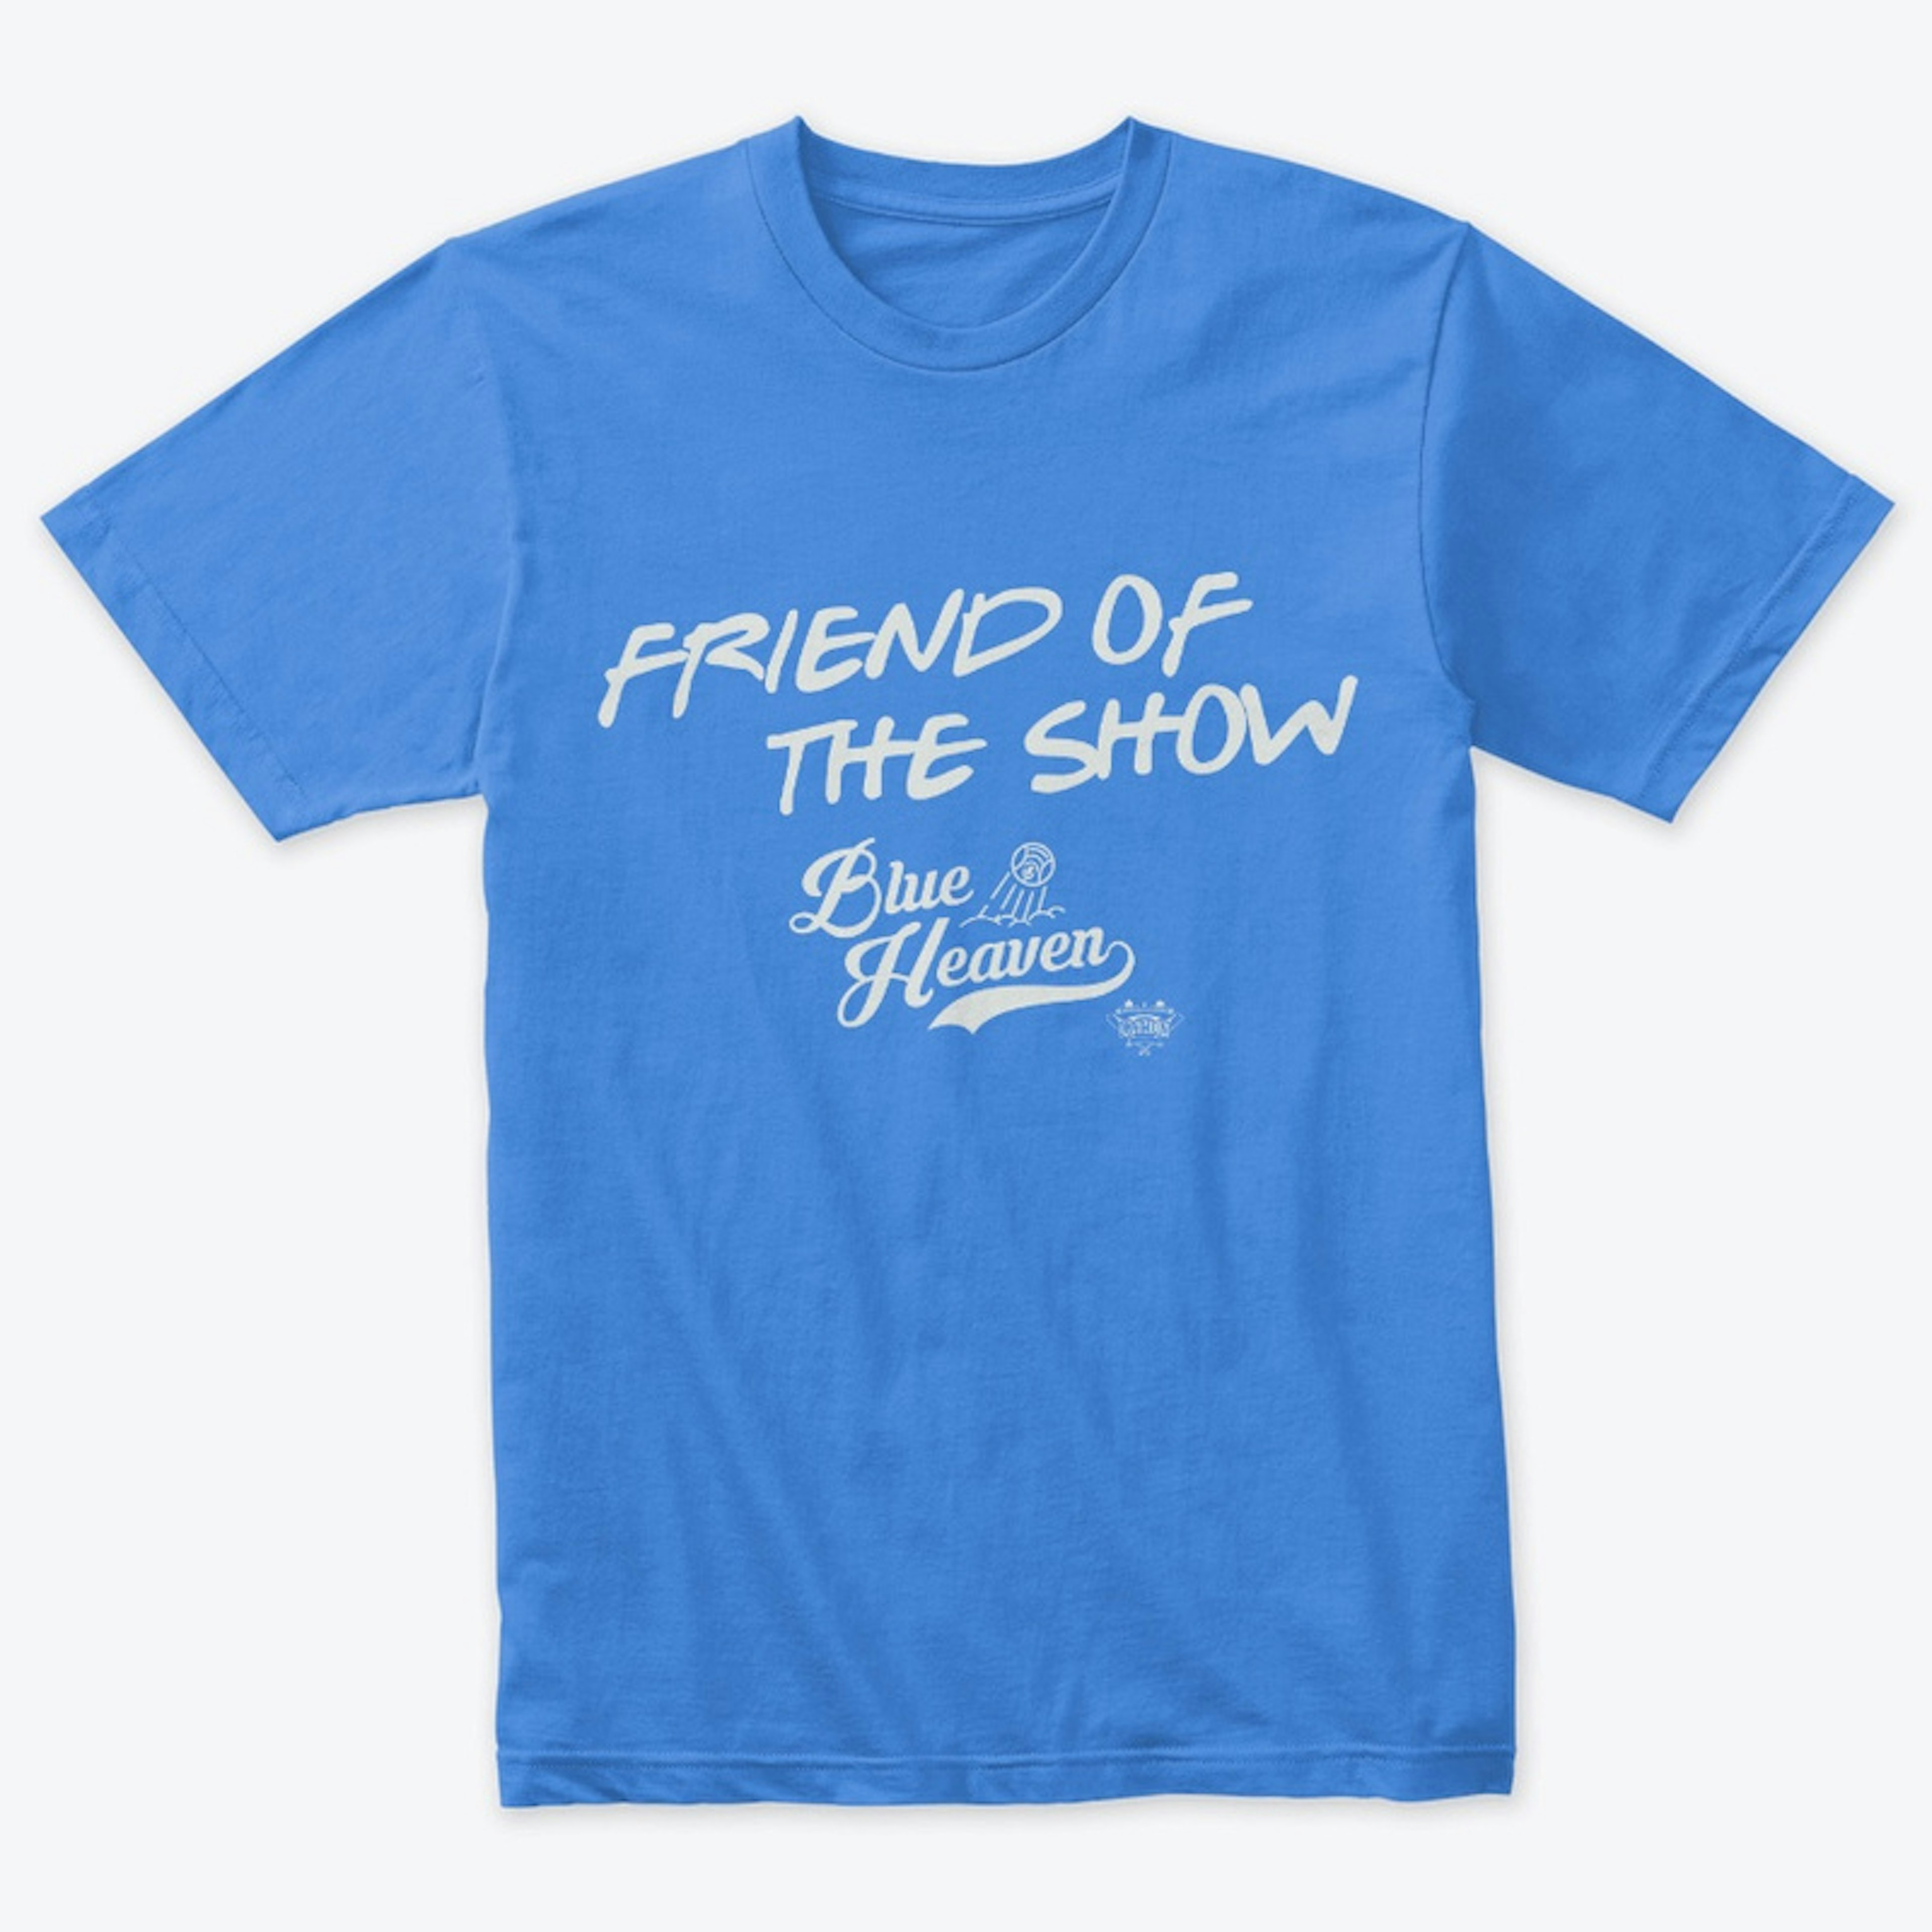 Friend of the Show